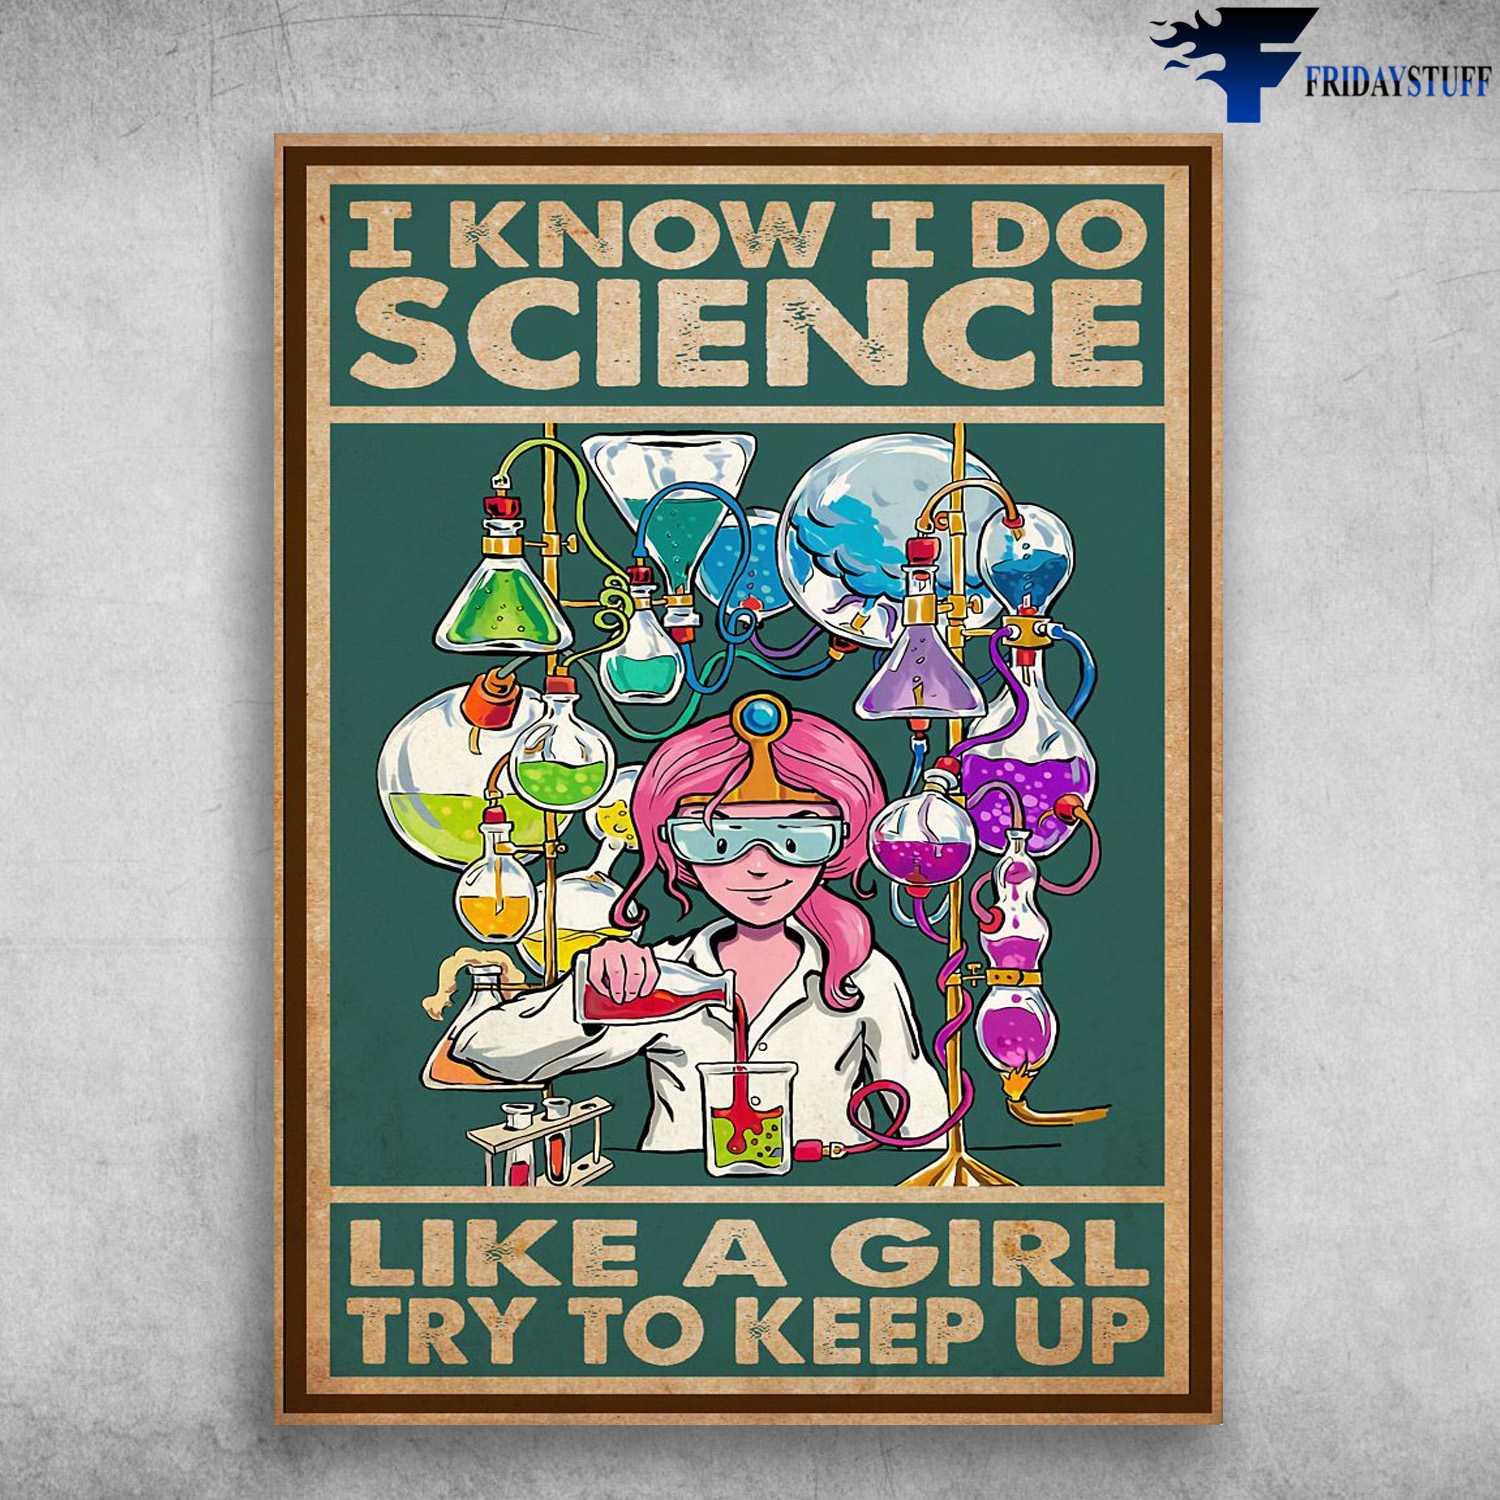 Science Lover, Science Poster, I Know I Do Science, Like A Girl Try To Keep Up